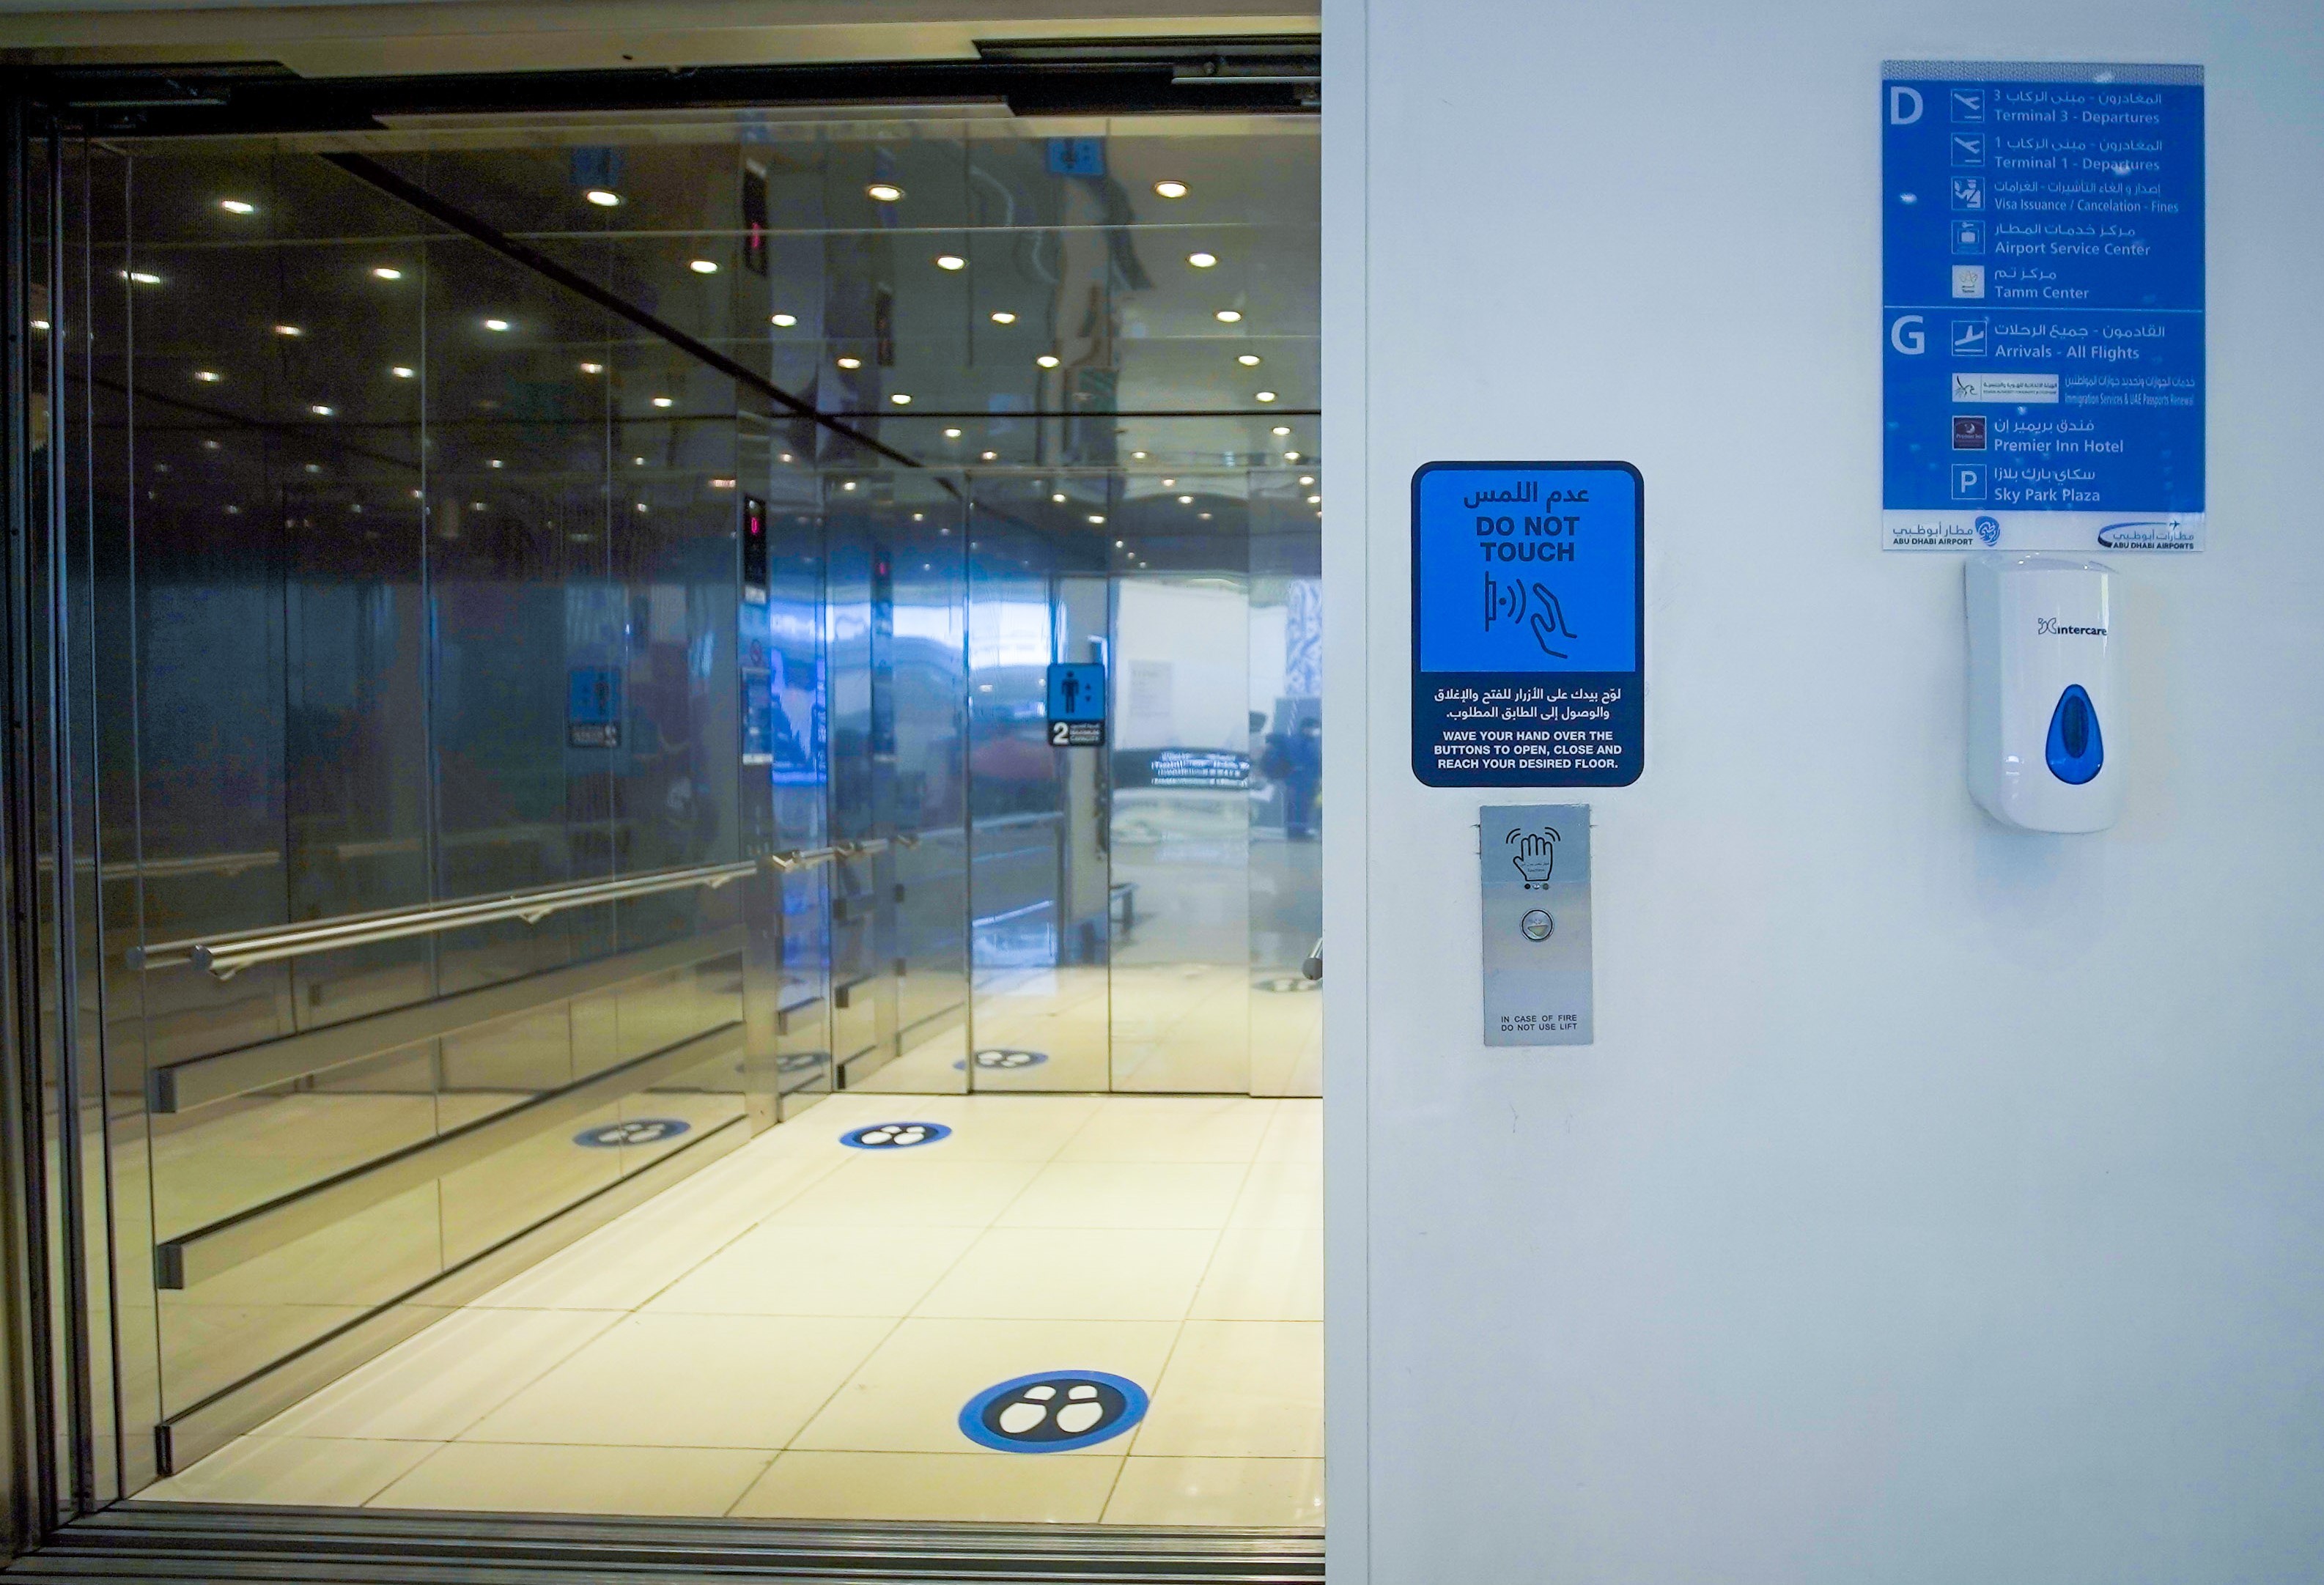 Abu Dhabi Airports Introduces First-Of-Its-Kind Touchless Elevator Technology To Enable COVID-19-Free Environment